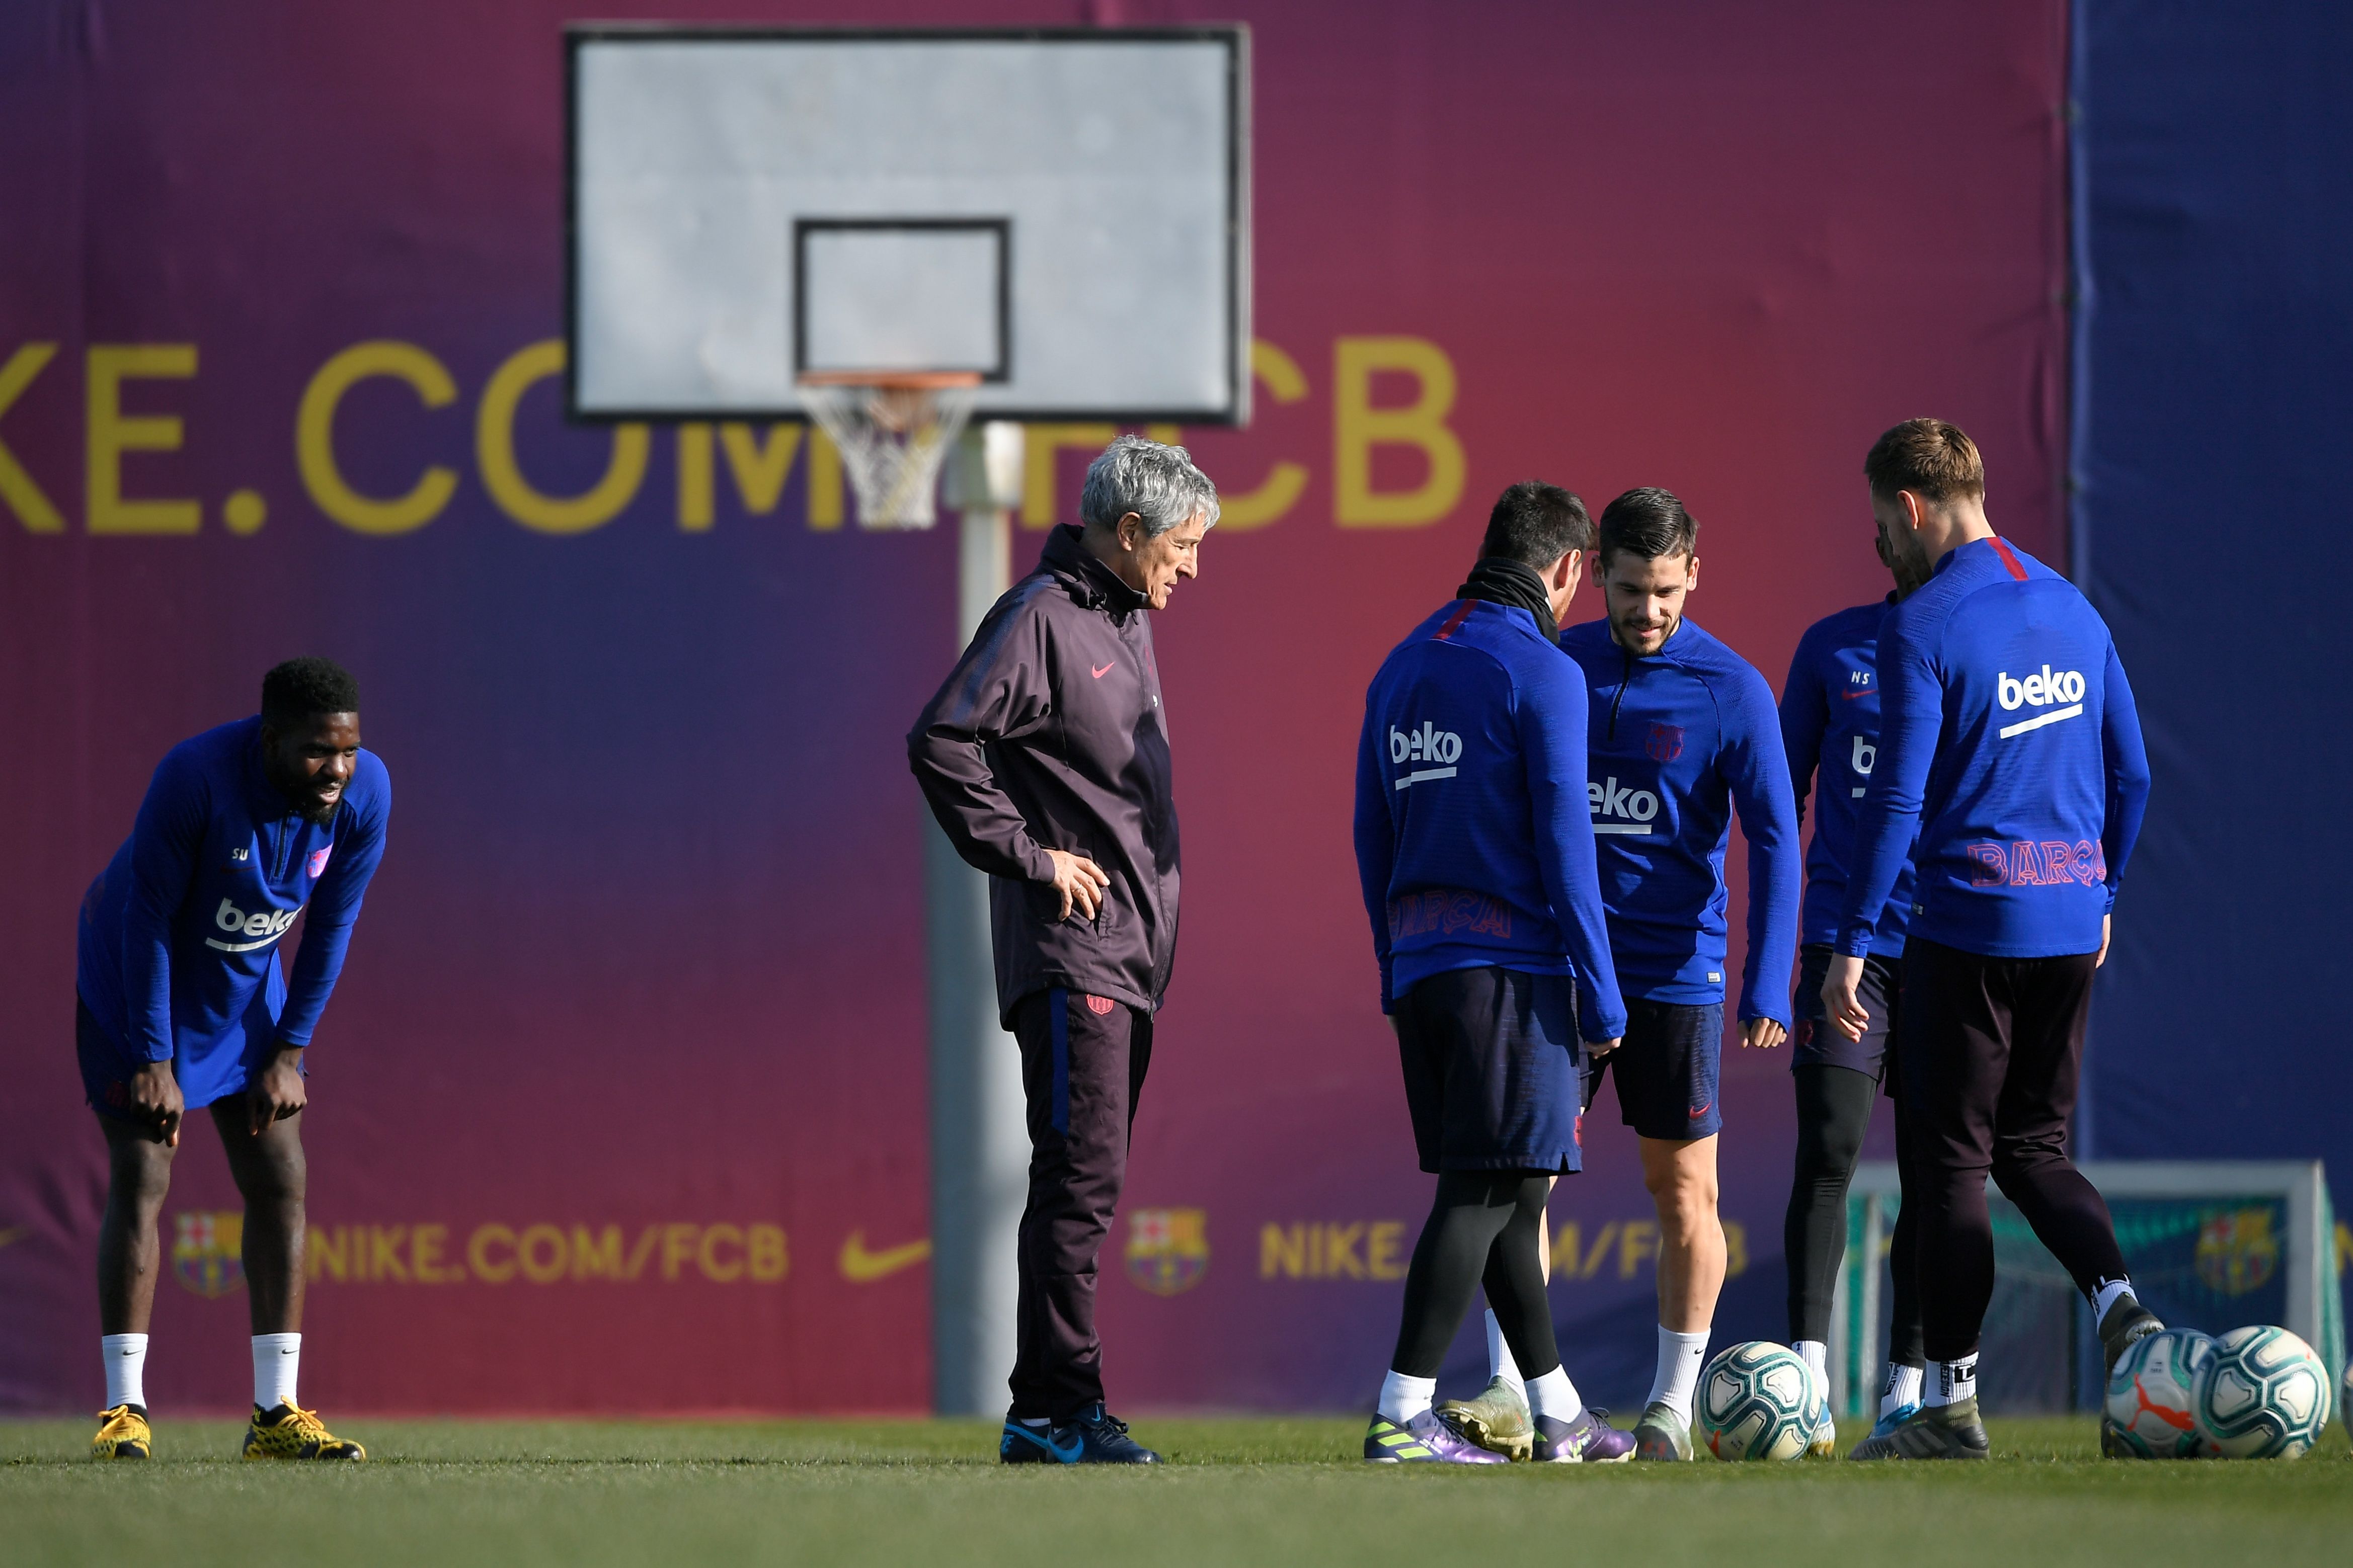 Barcelona's new coach, Spaniard Quique Setien (C), attends a training session at the Joan Gamper Sports City training ground in Sant Joan Despi on January 18, 2020. (Photo by LLUIS GENE / AFP) (Photo by LLUIS GENE/AFP via Getty Images)